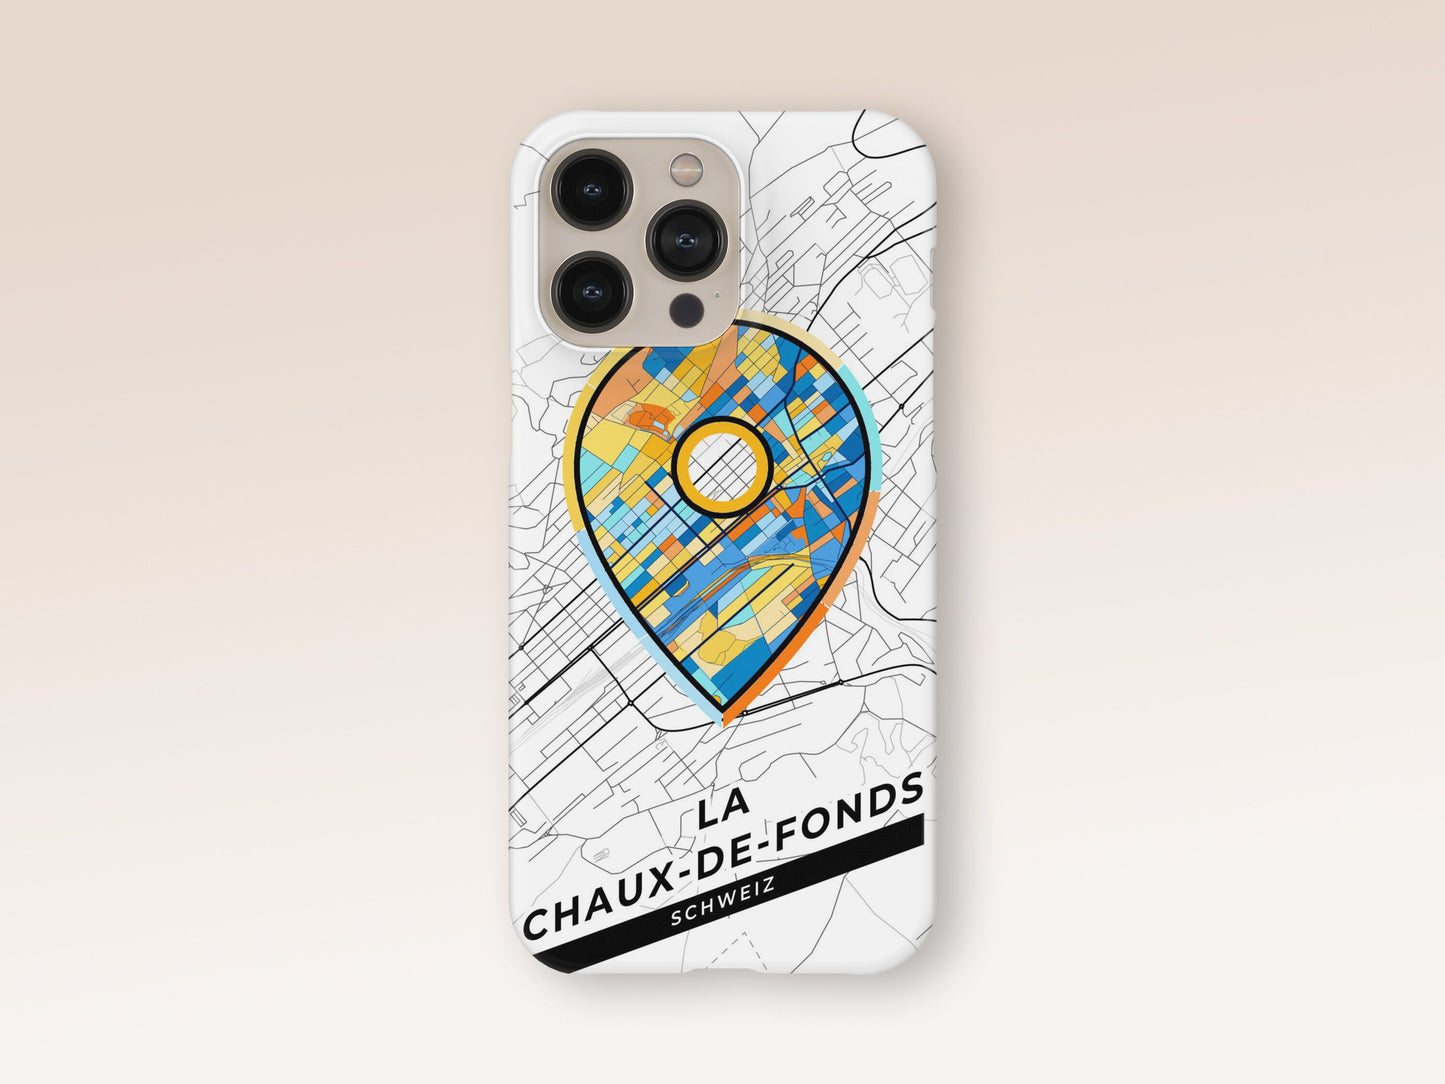 La Chaux-De-Fonds Switzerland slim phone case with colorful icon. Birthday, wedding or housewarming gift. Couple match cases. 1